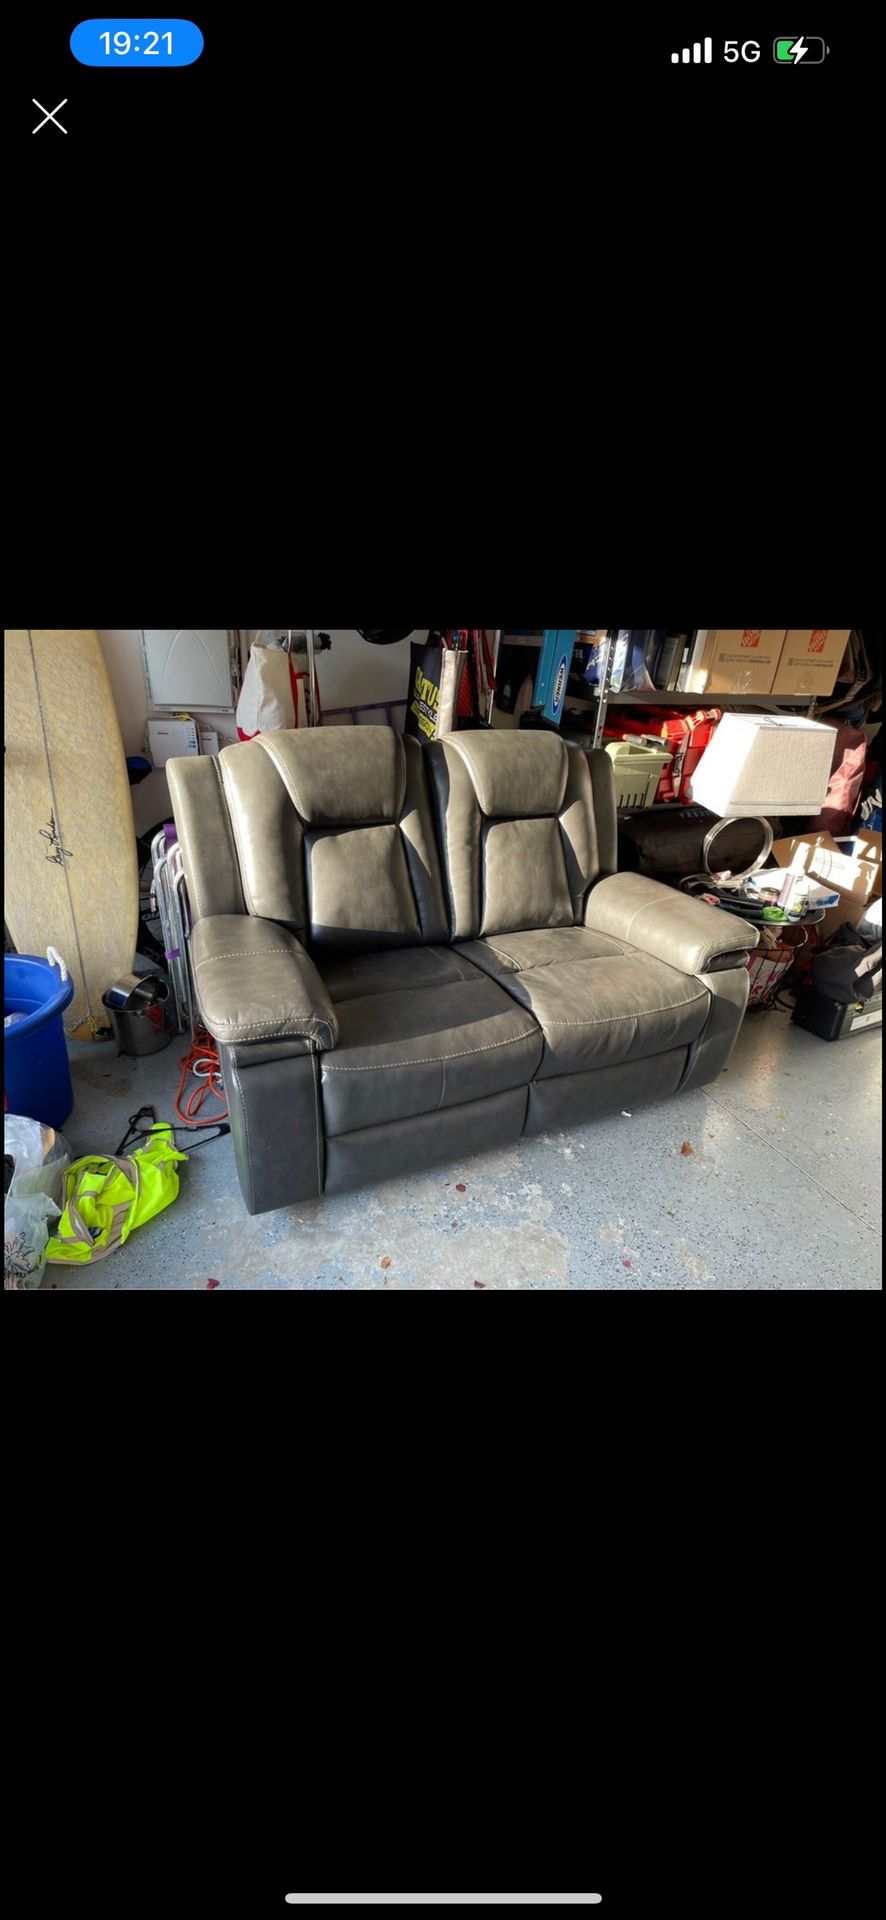 Power Reclining Leather Couch